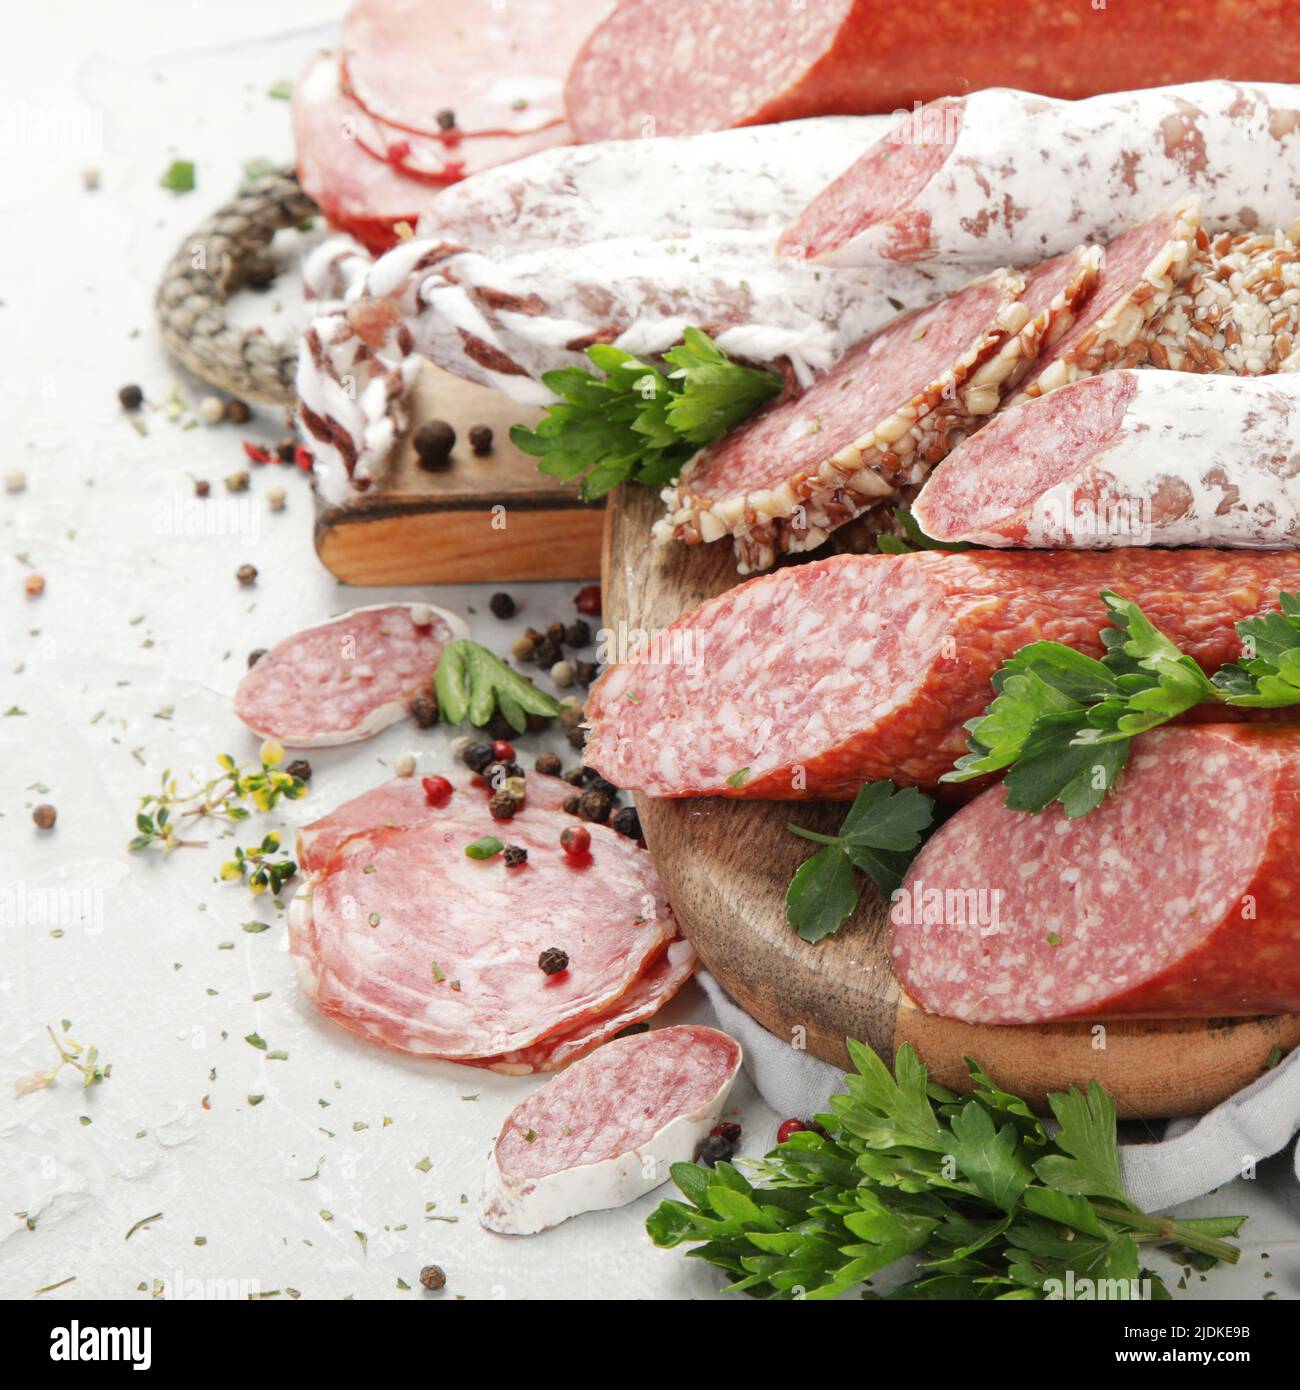 Sausages salami assortment on light background. Meat product made of finely chopped and seasoned meat. Stock Photo